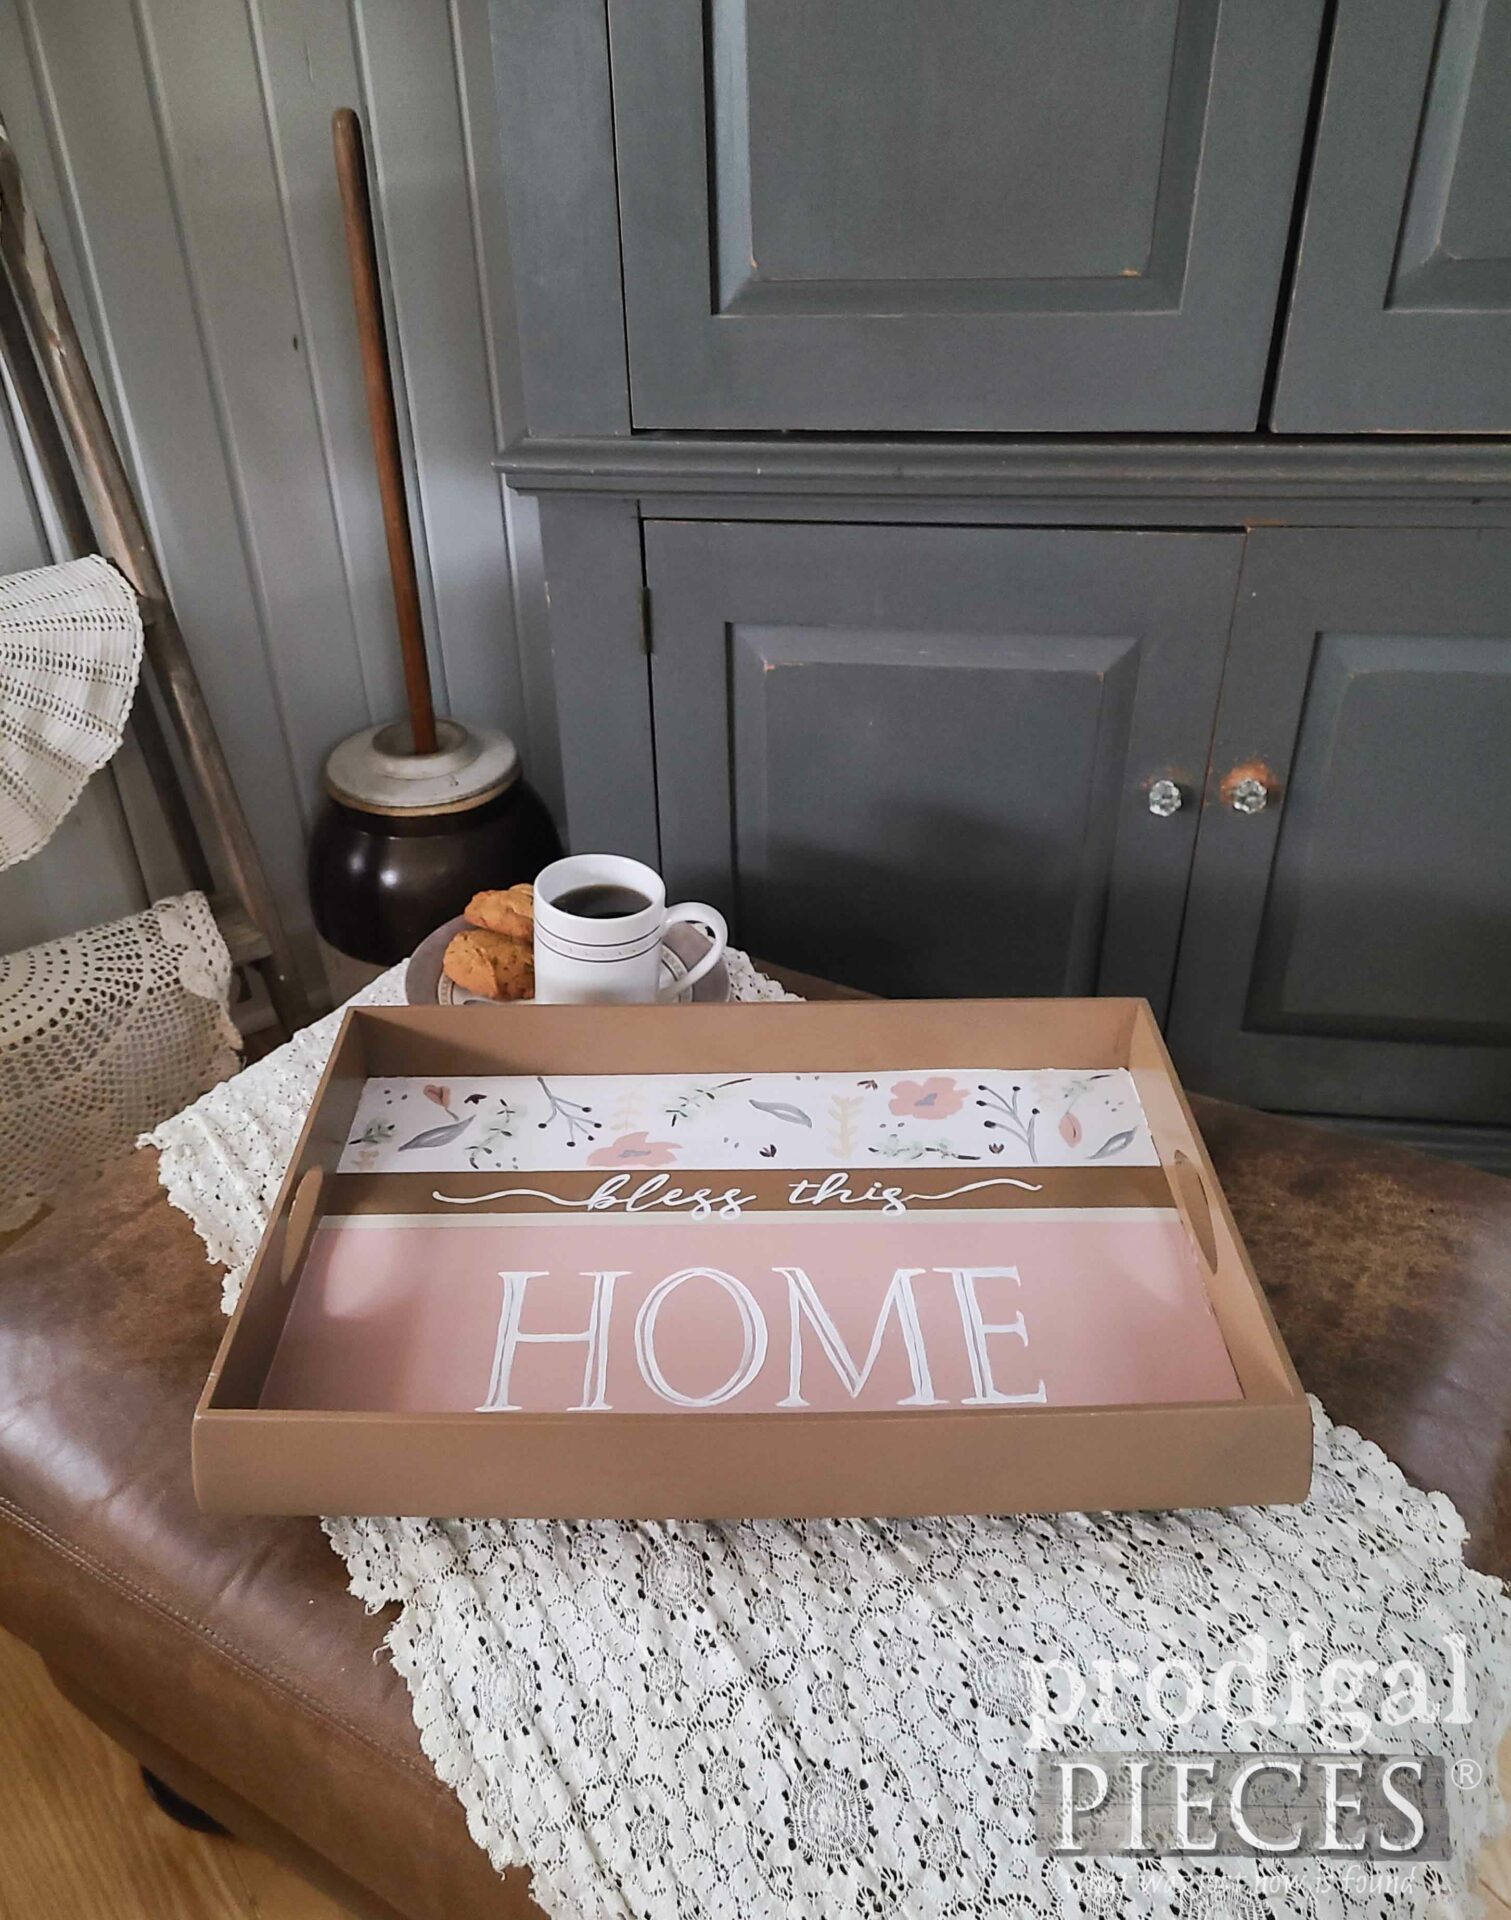 Upcycled Serving Tray from Thrift Store Find by Larissa of Prodigal Pieces | prodigalpieces.com #prodigalpieces #thrifted #diy #homedecor